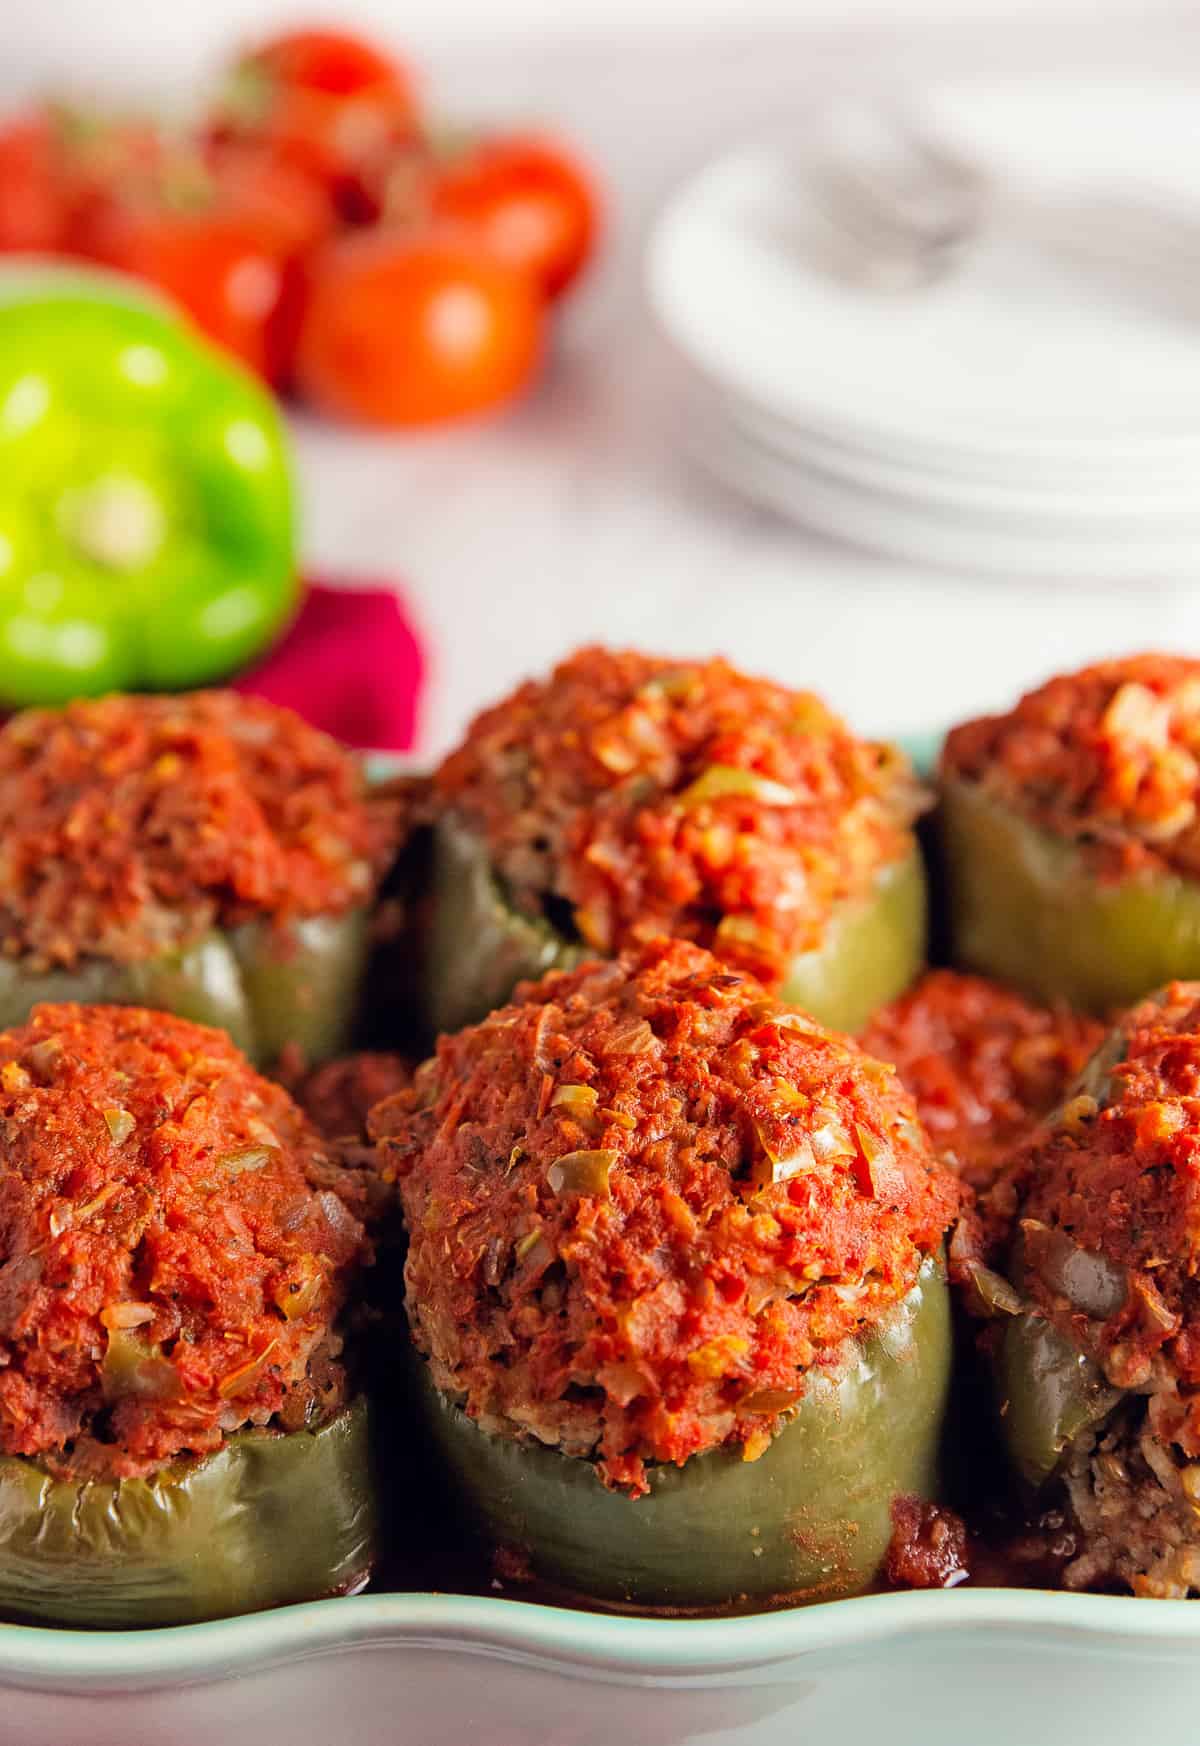 old fashioned stuffed peppers, stuffed peppers, peppers, bell peppers, recipe, stuffed pepper recipe, vegan, vegan recipe, whole food plant based recipe, whole food plant based, vegetarian, vegetarian recipe, gluten free, gluten free recipe, vegan dinner, vegan meals, vegetarian dinner, vegetarian meal, whole food plant based dinner, whole food plant based meal, gluten free dinner, gluten free meal, healthy, oil free, no oil, tomatoes, rice, lentils, mashed potatoes, red gravy, tomato gravy, entertaining, wfpb, dairy free, no dairy, traditional, American, classic, delicious, the best, winter, fall, spring, summer